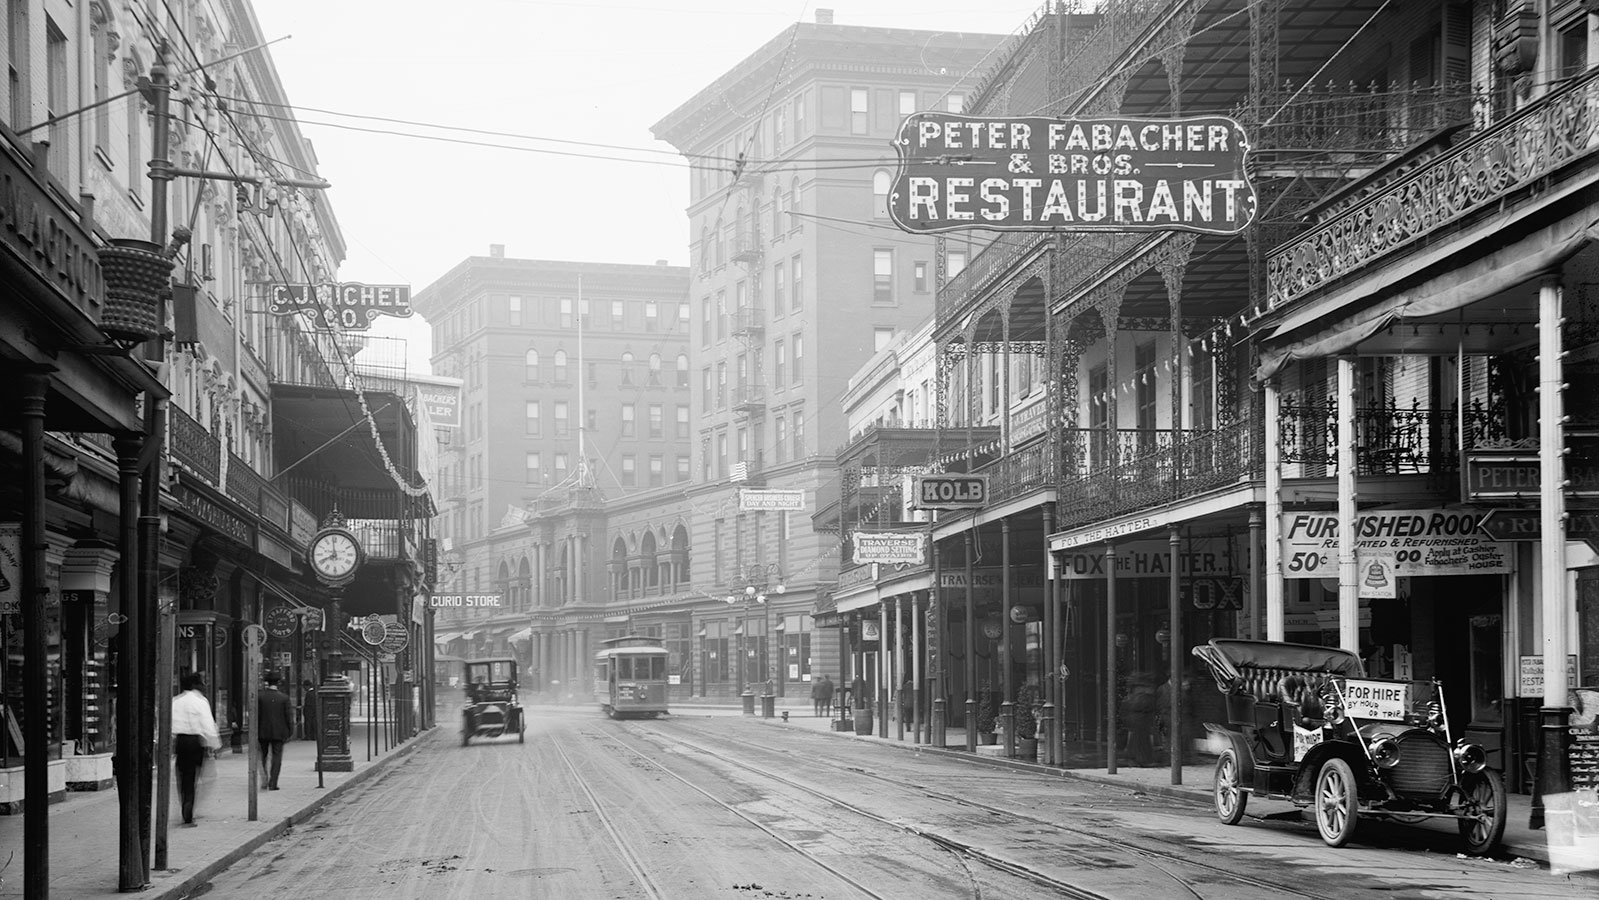 St. Charles Street in New Orleans, Louisiana, circa 1910